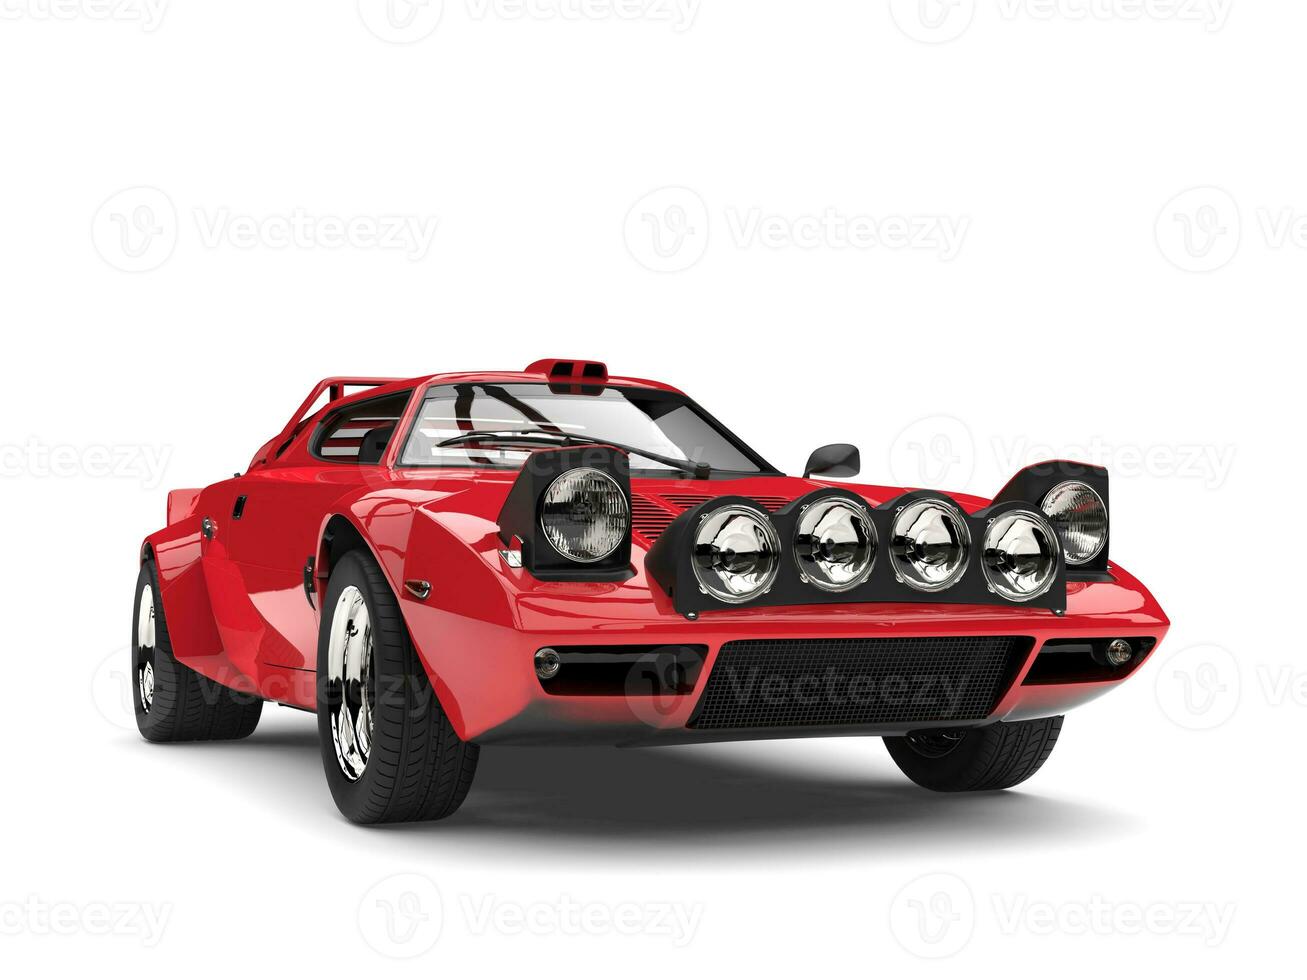 Bright red vintage sports race car - front view photo